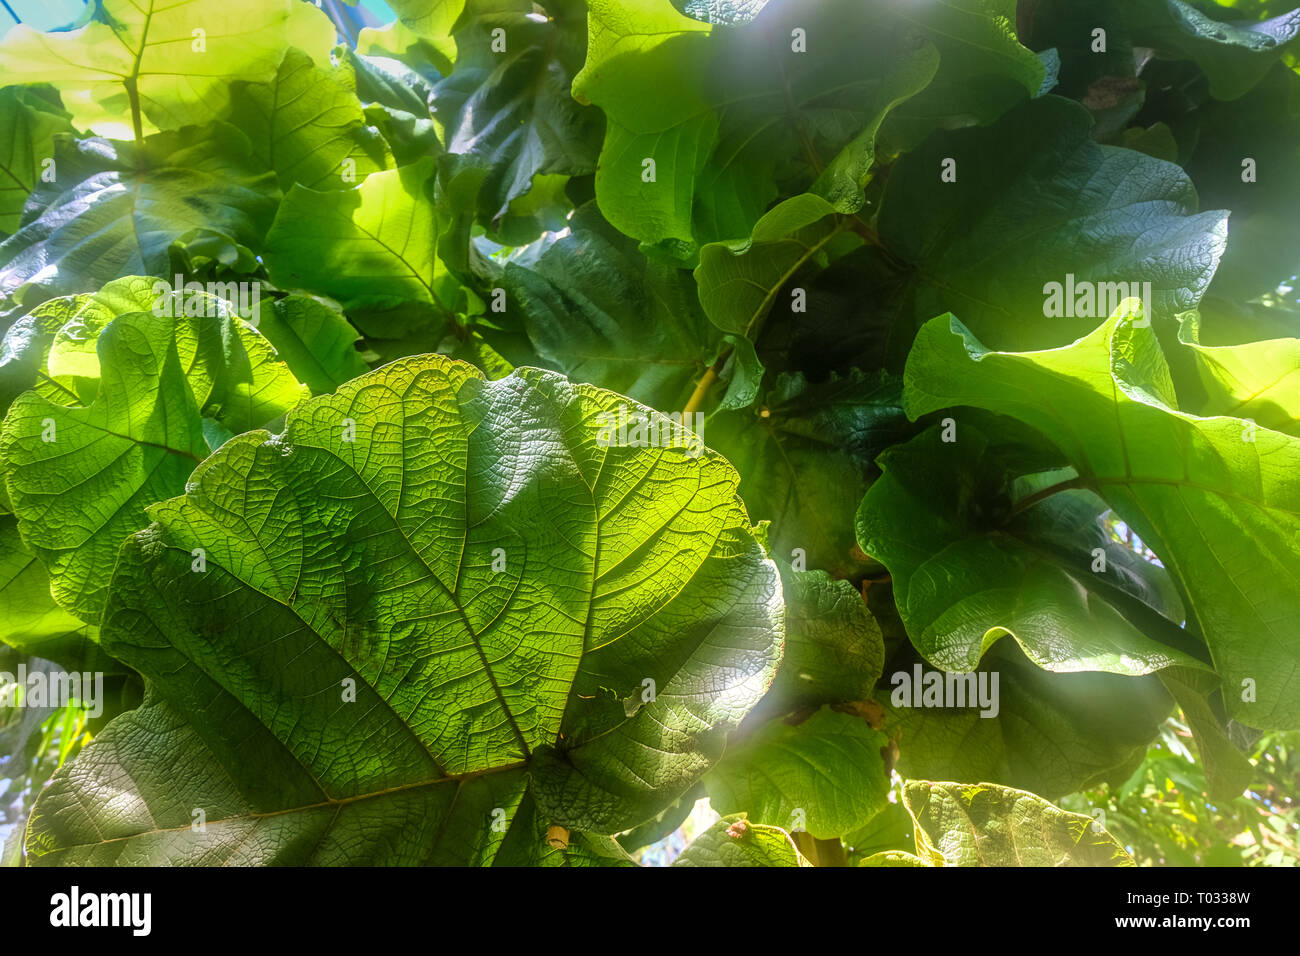 The green tropical leaves in botanical garden. Texture for design and decor Stock Photo